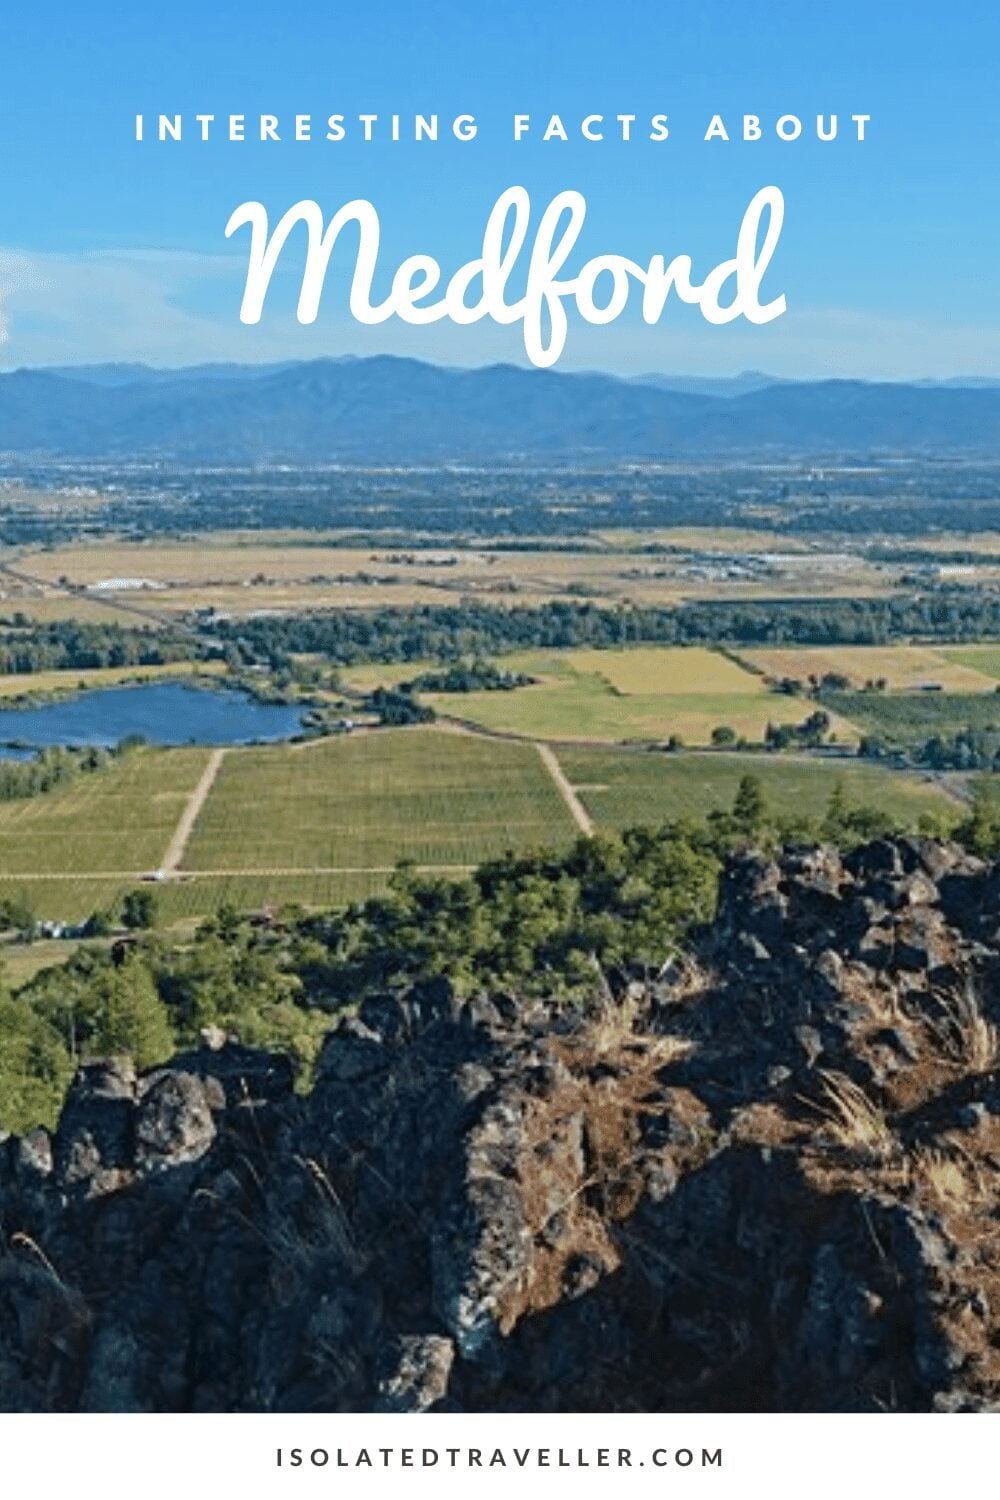 Facts About Medford, Oregon